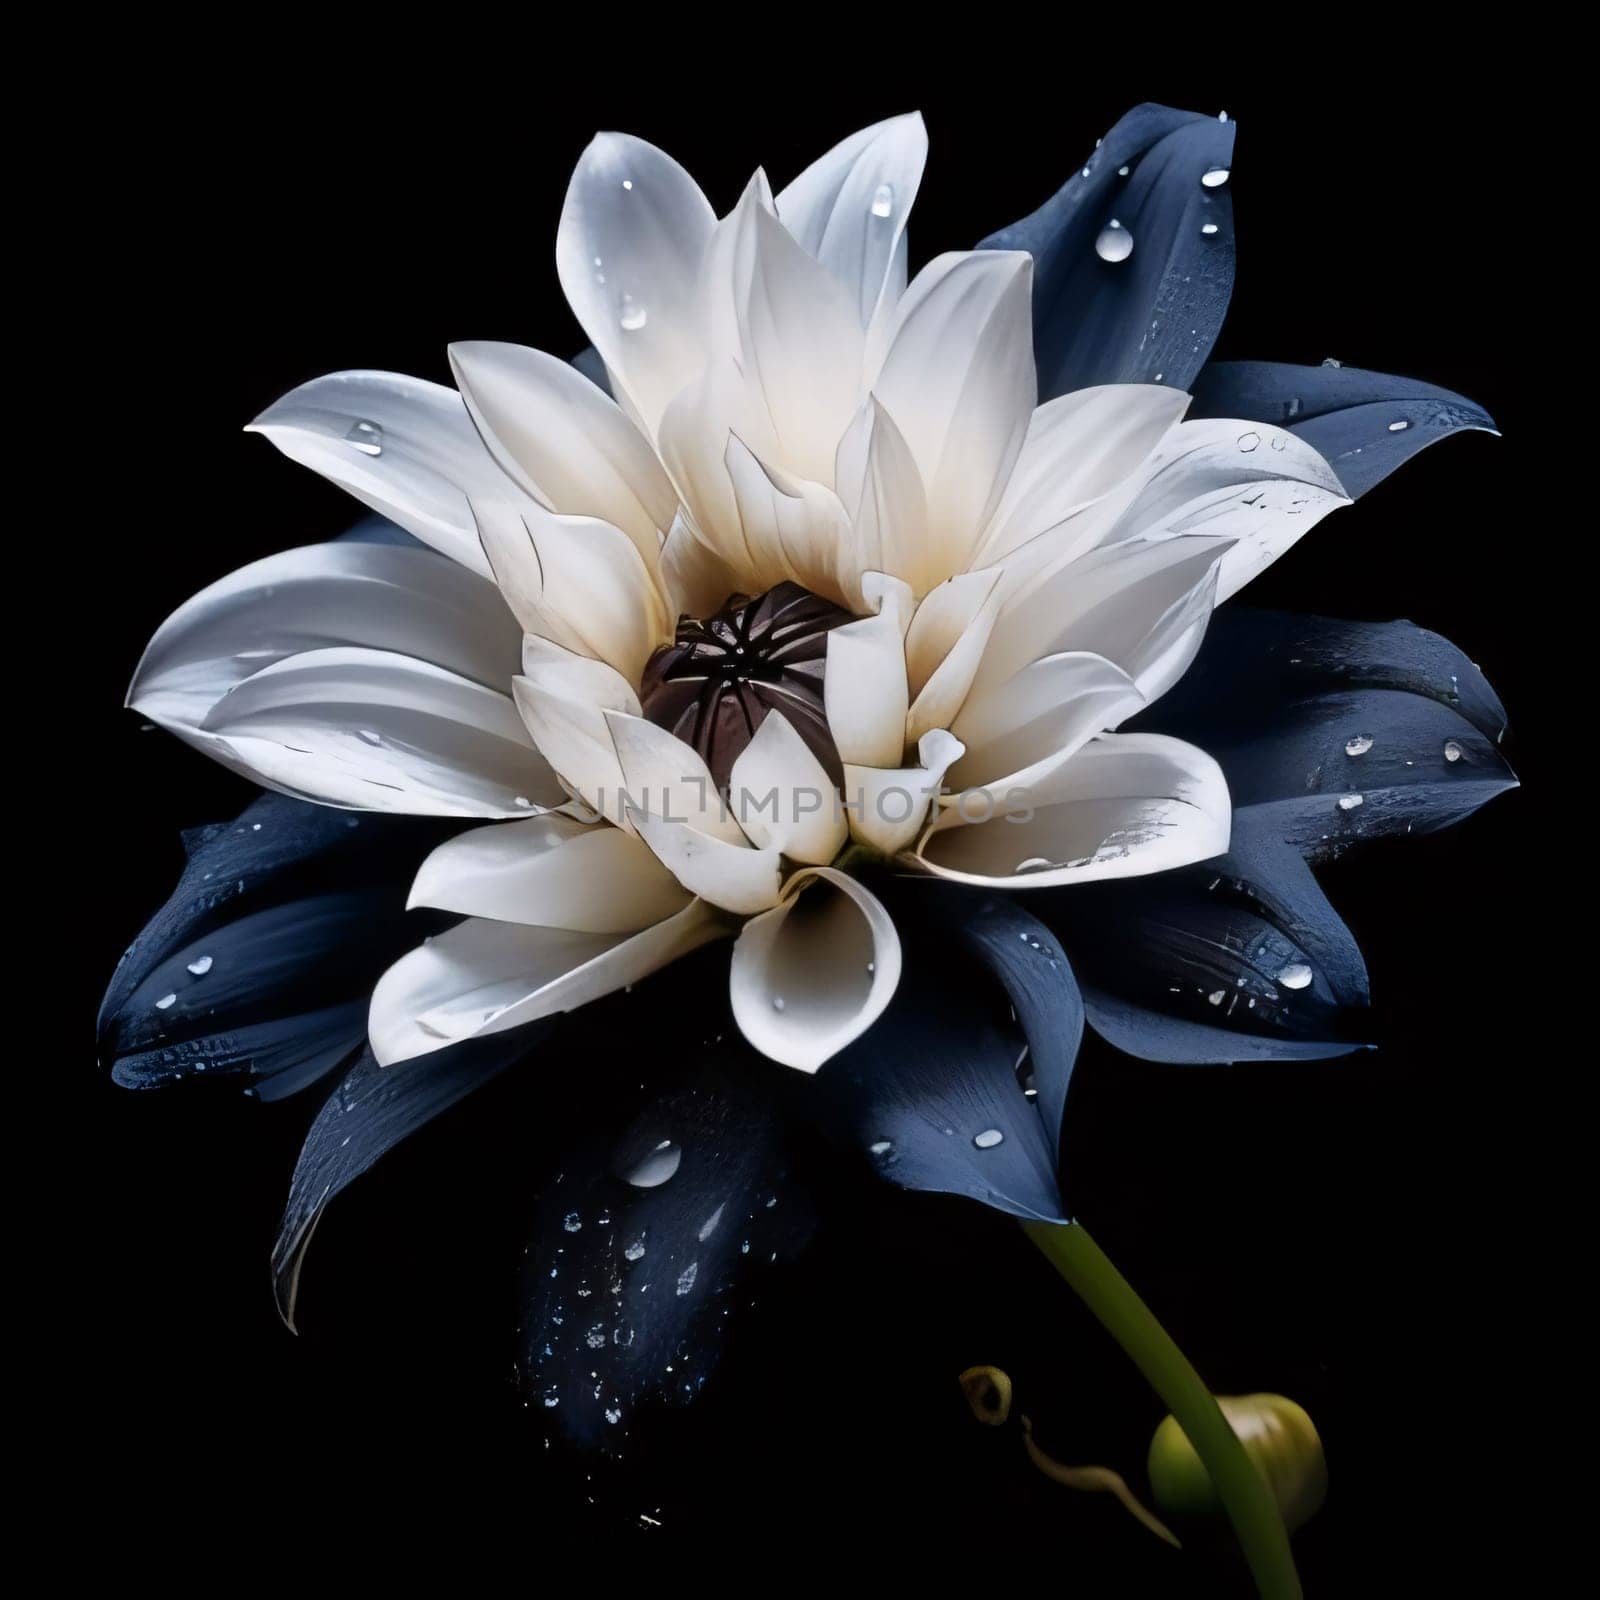 Black and white petal with water drops isolated on black background. Flowering flowers, a symbol of spring, new life. A joyful time of nature waking up to life.